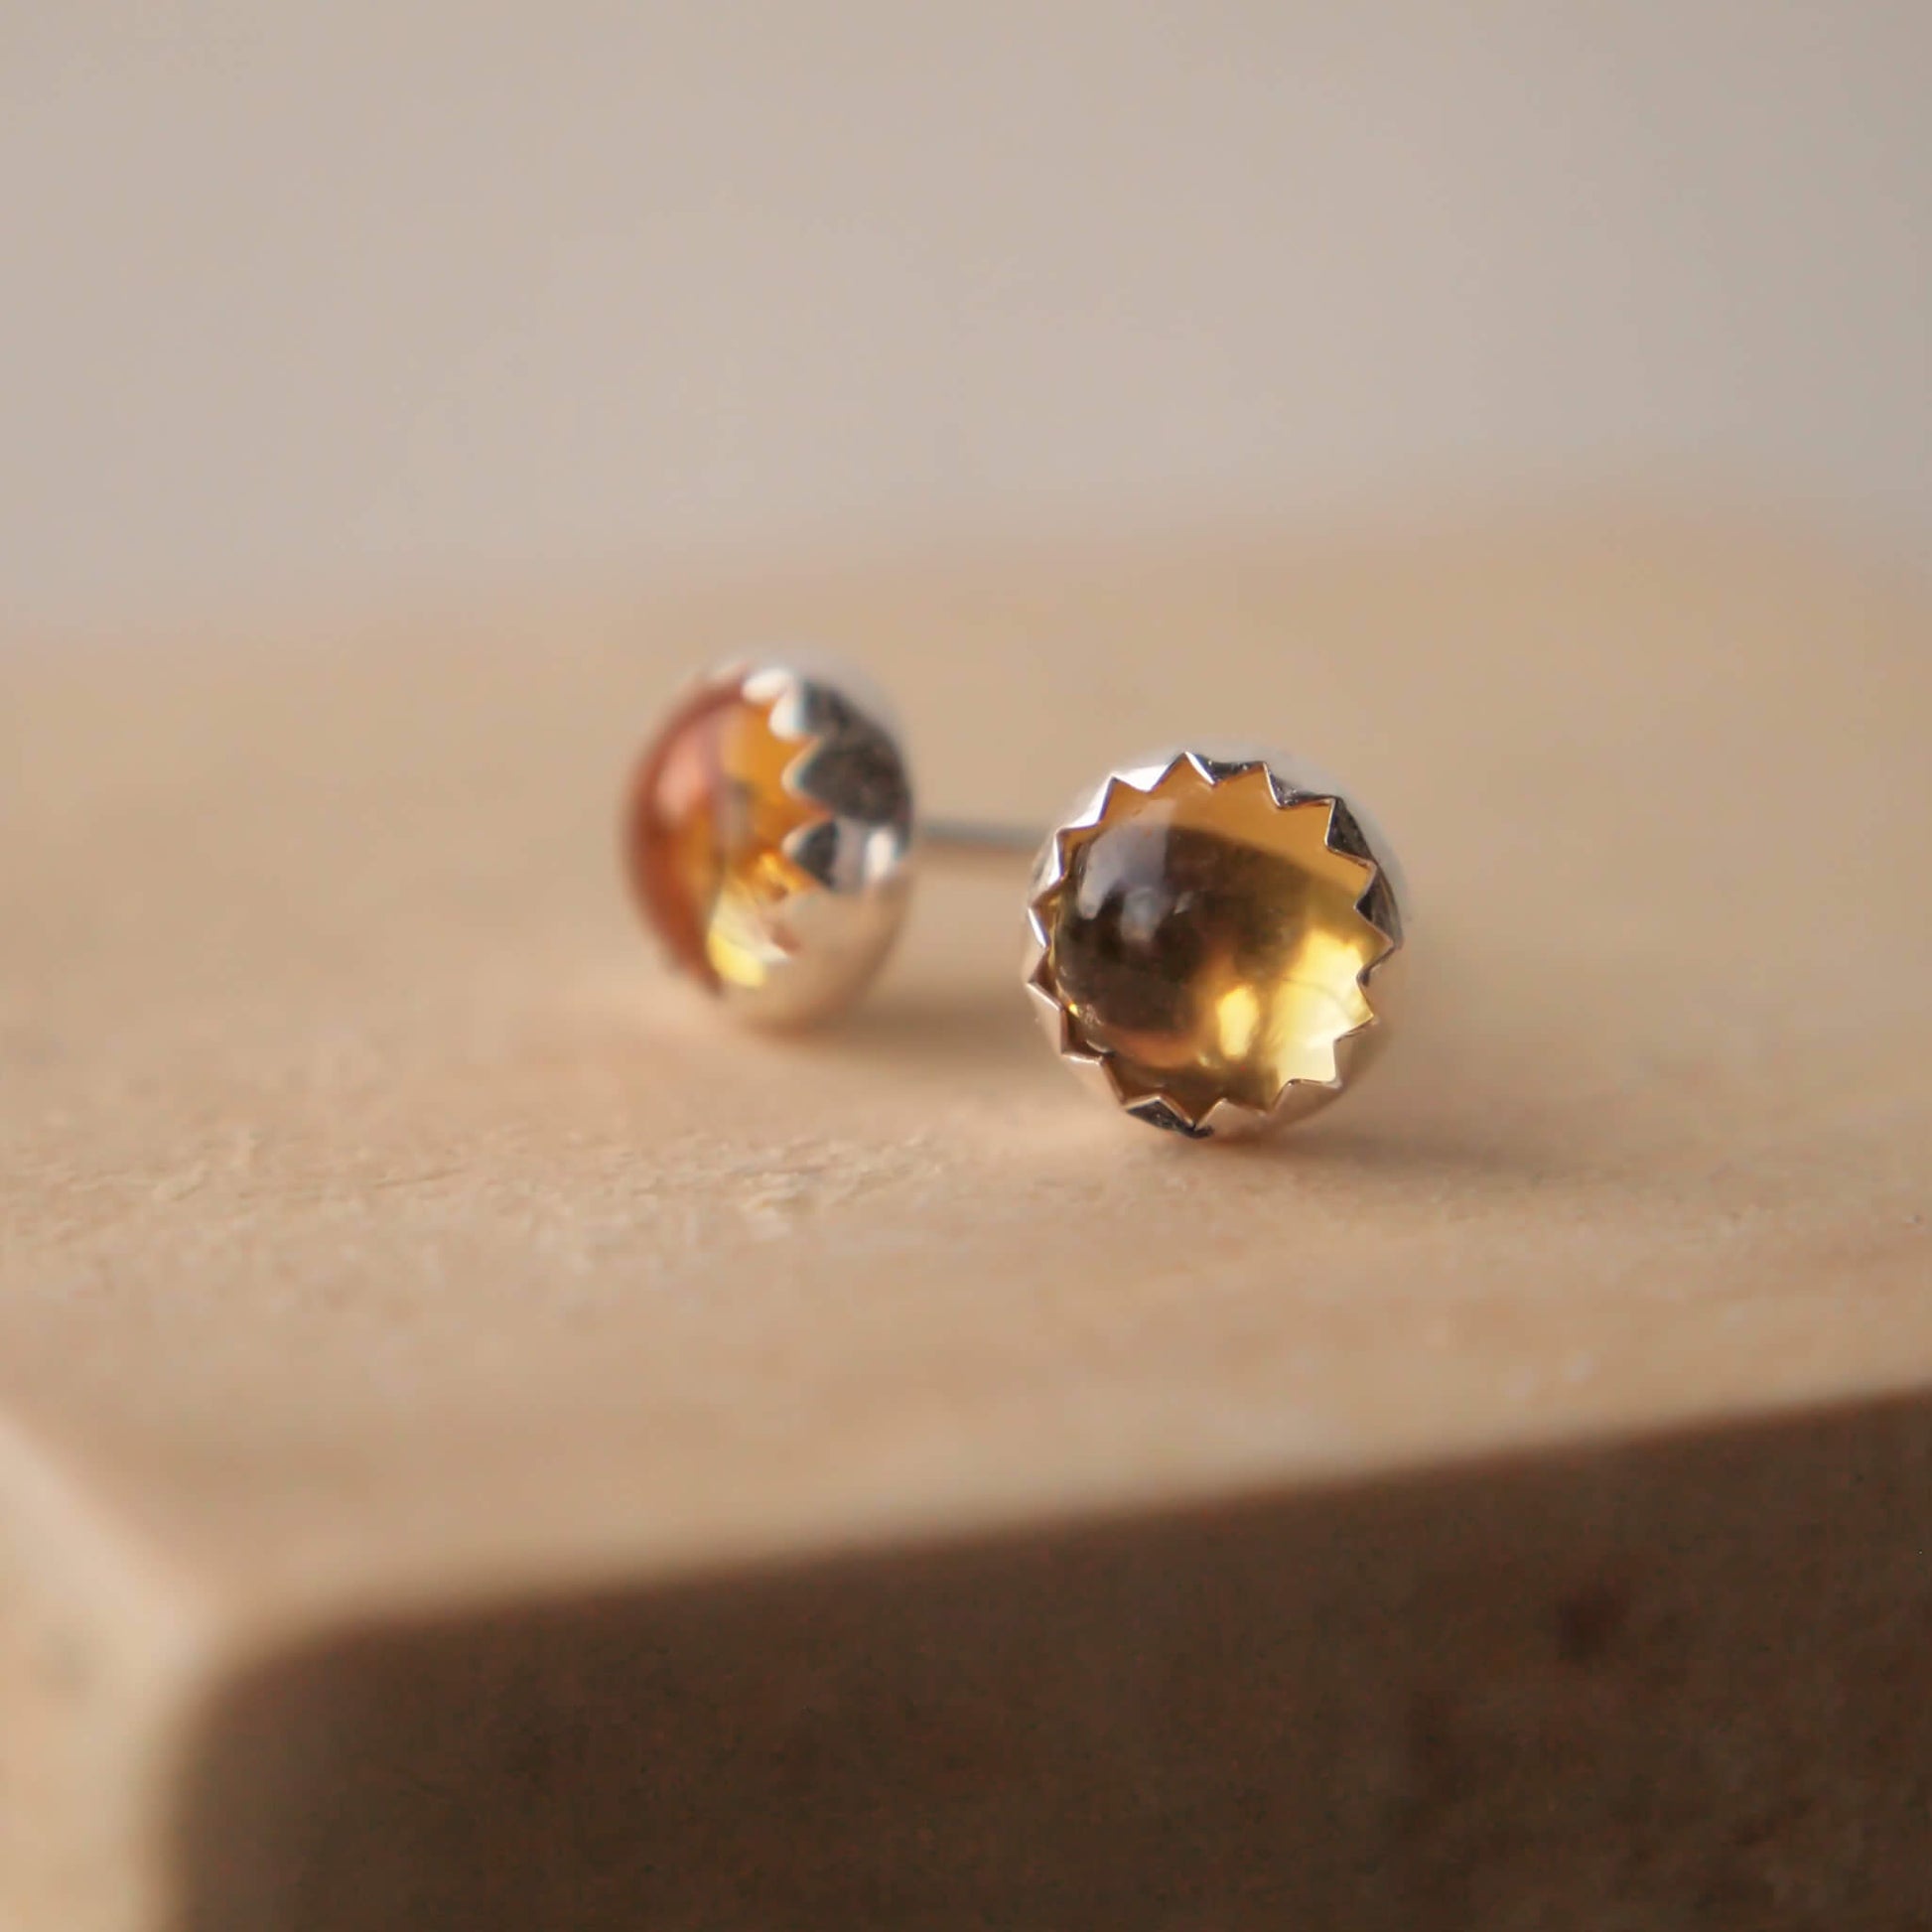 Citrine Gemstone Stud earrings made from round November birthstone gems 5mm in size and set in a simple sterling silver setting. handcrafted by maram jewellery in the UK